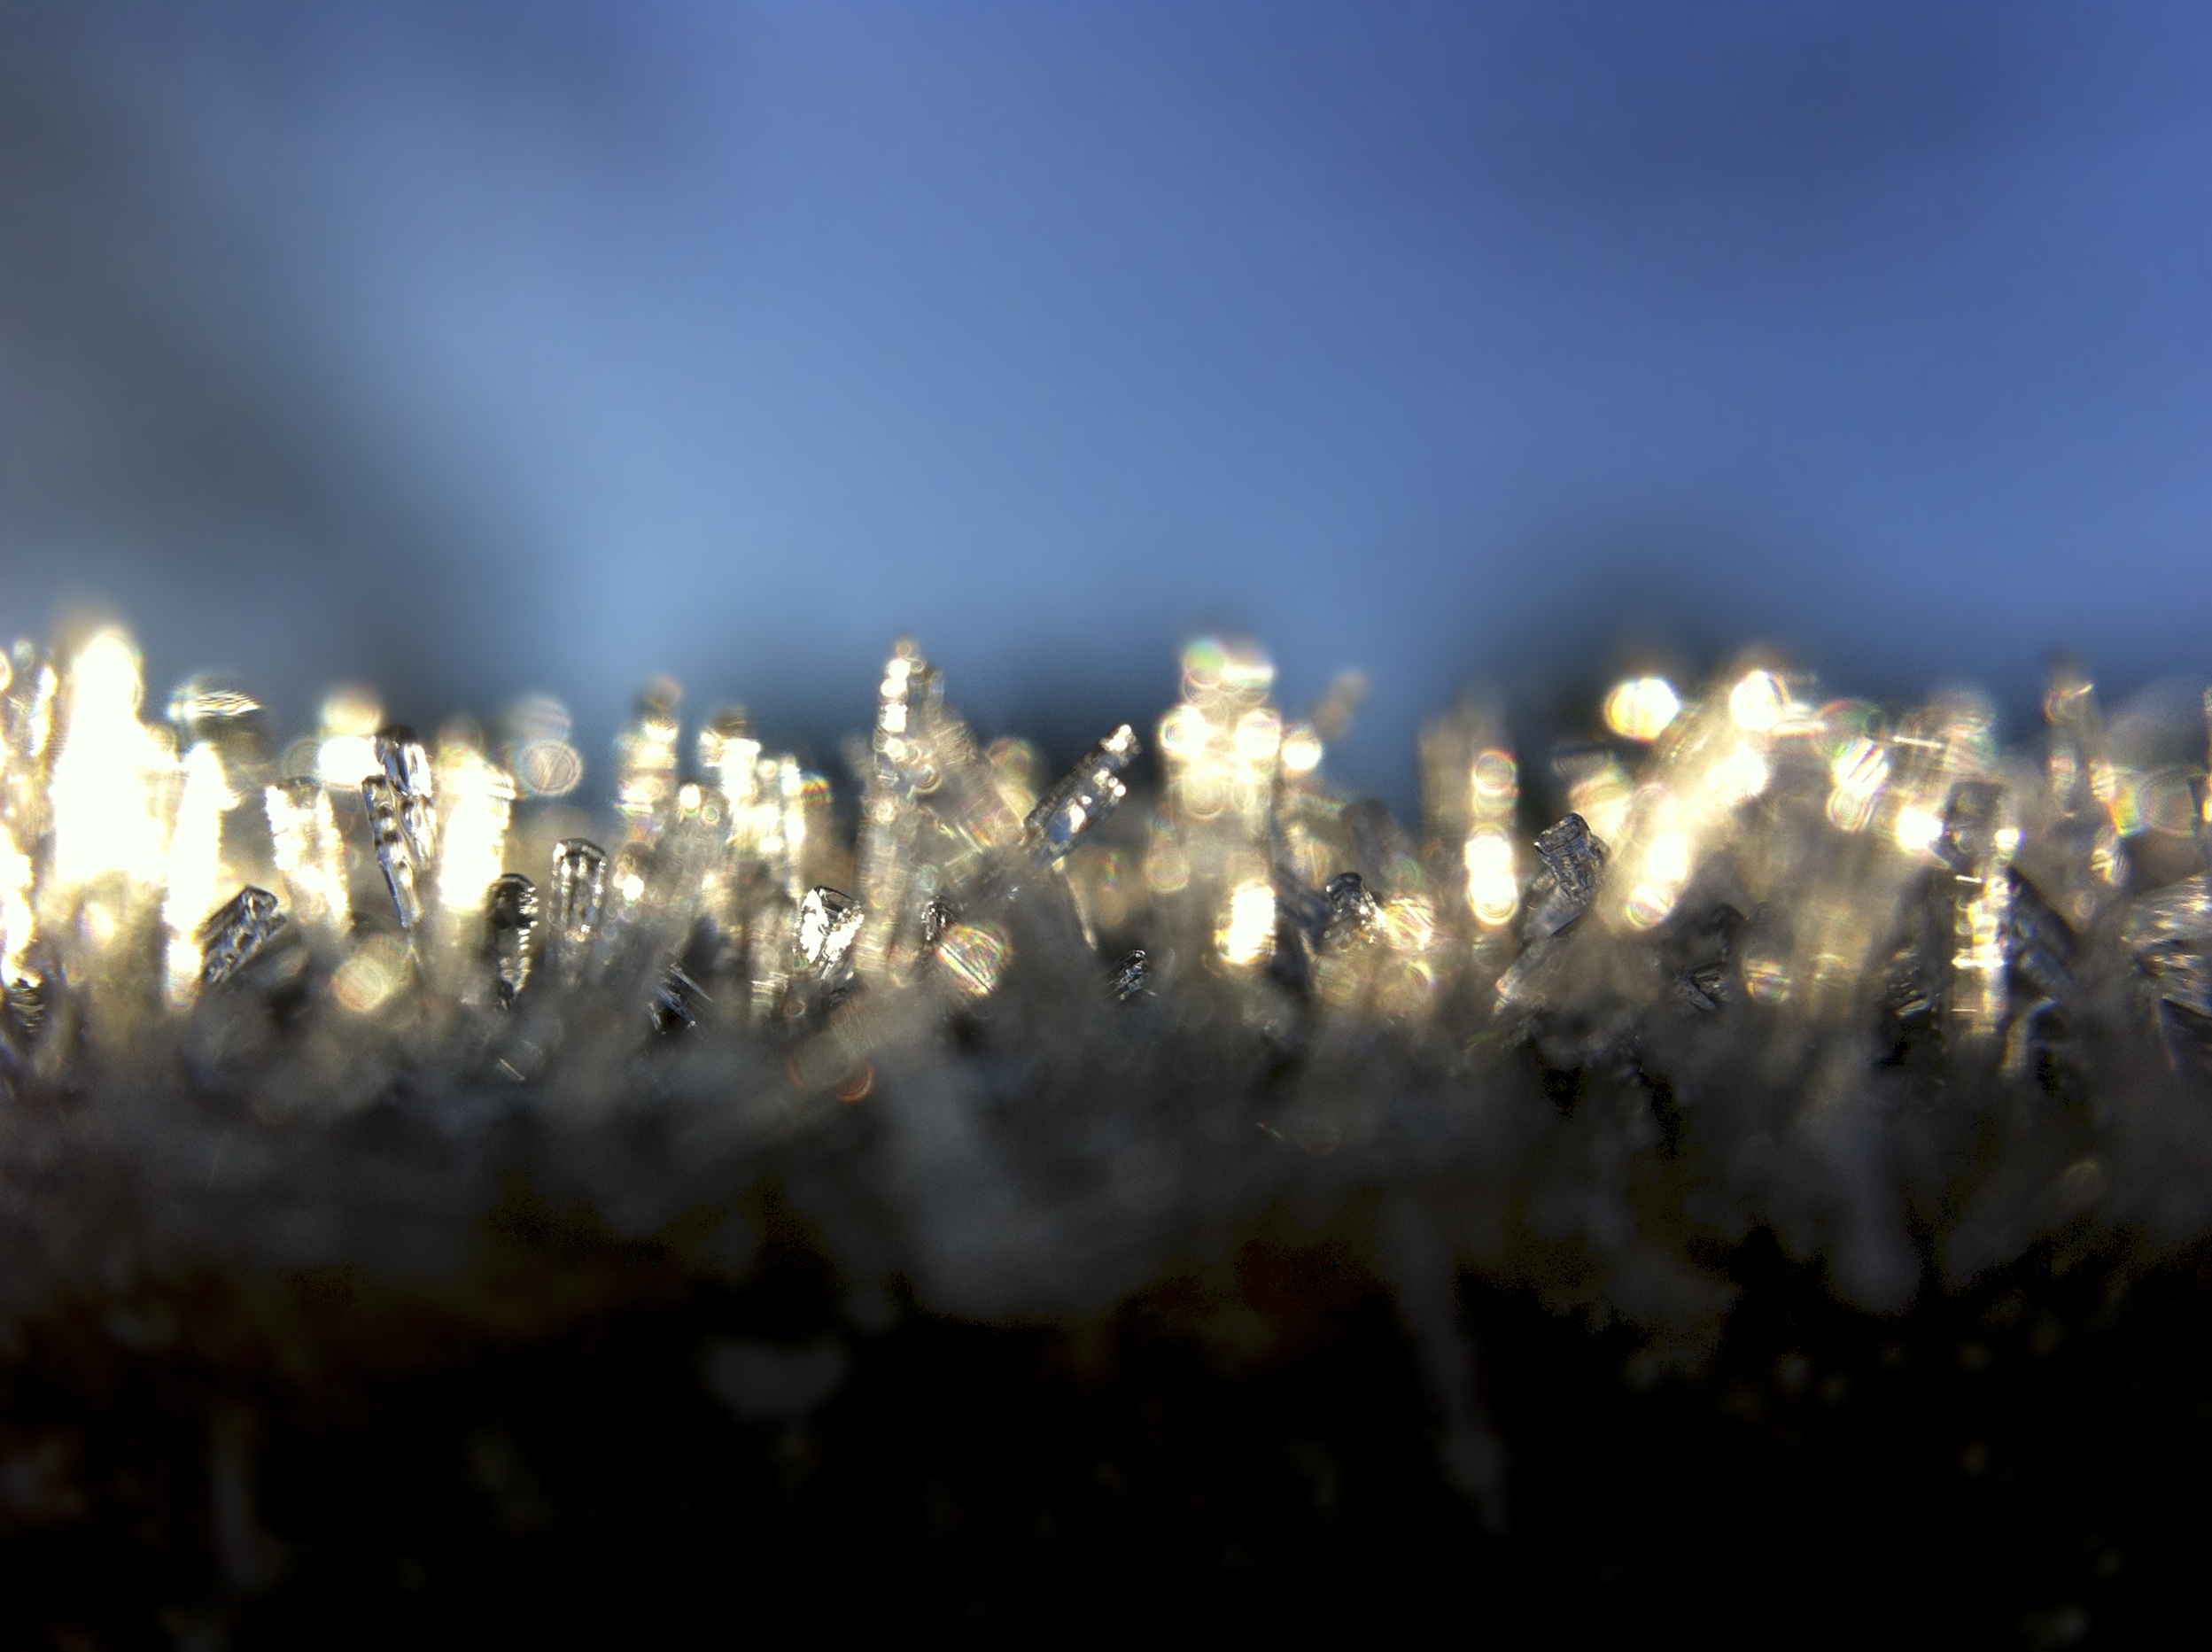 Ice Crystals In Morning Sunlight. Flickr - A Guy Taking Pictures.